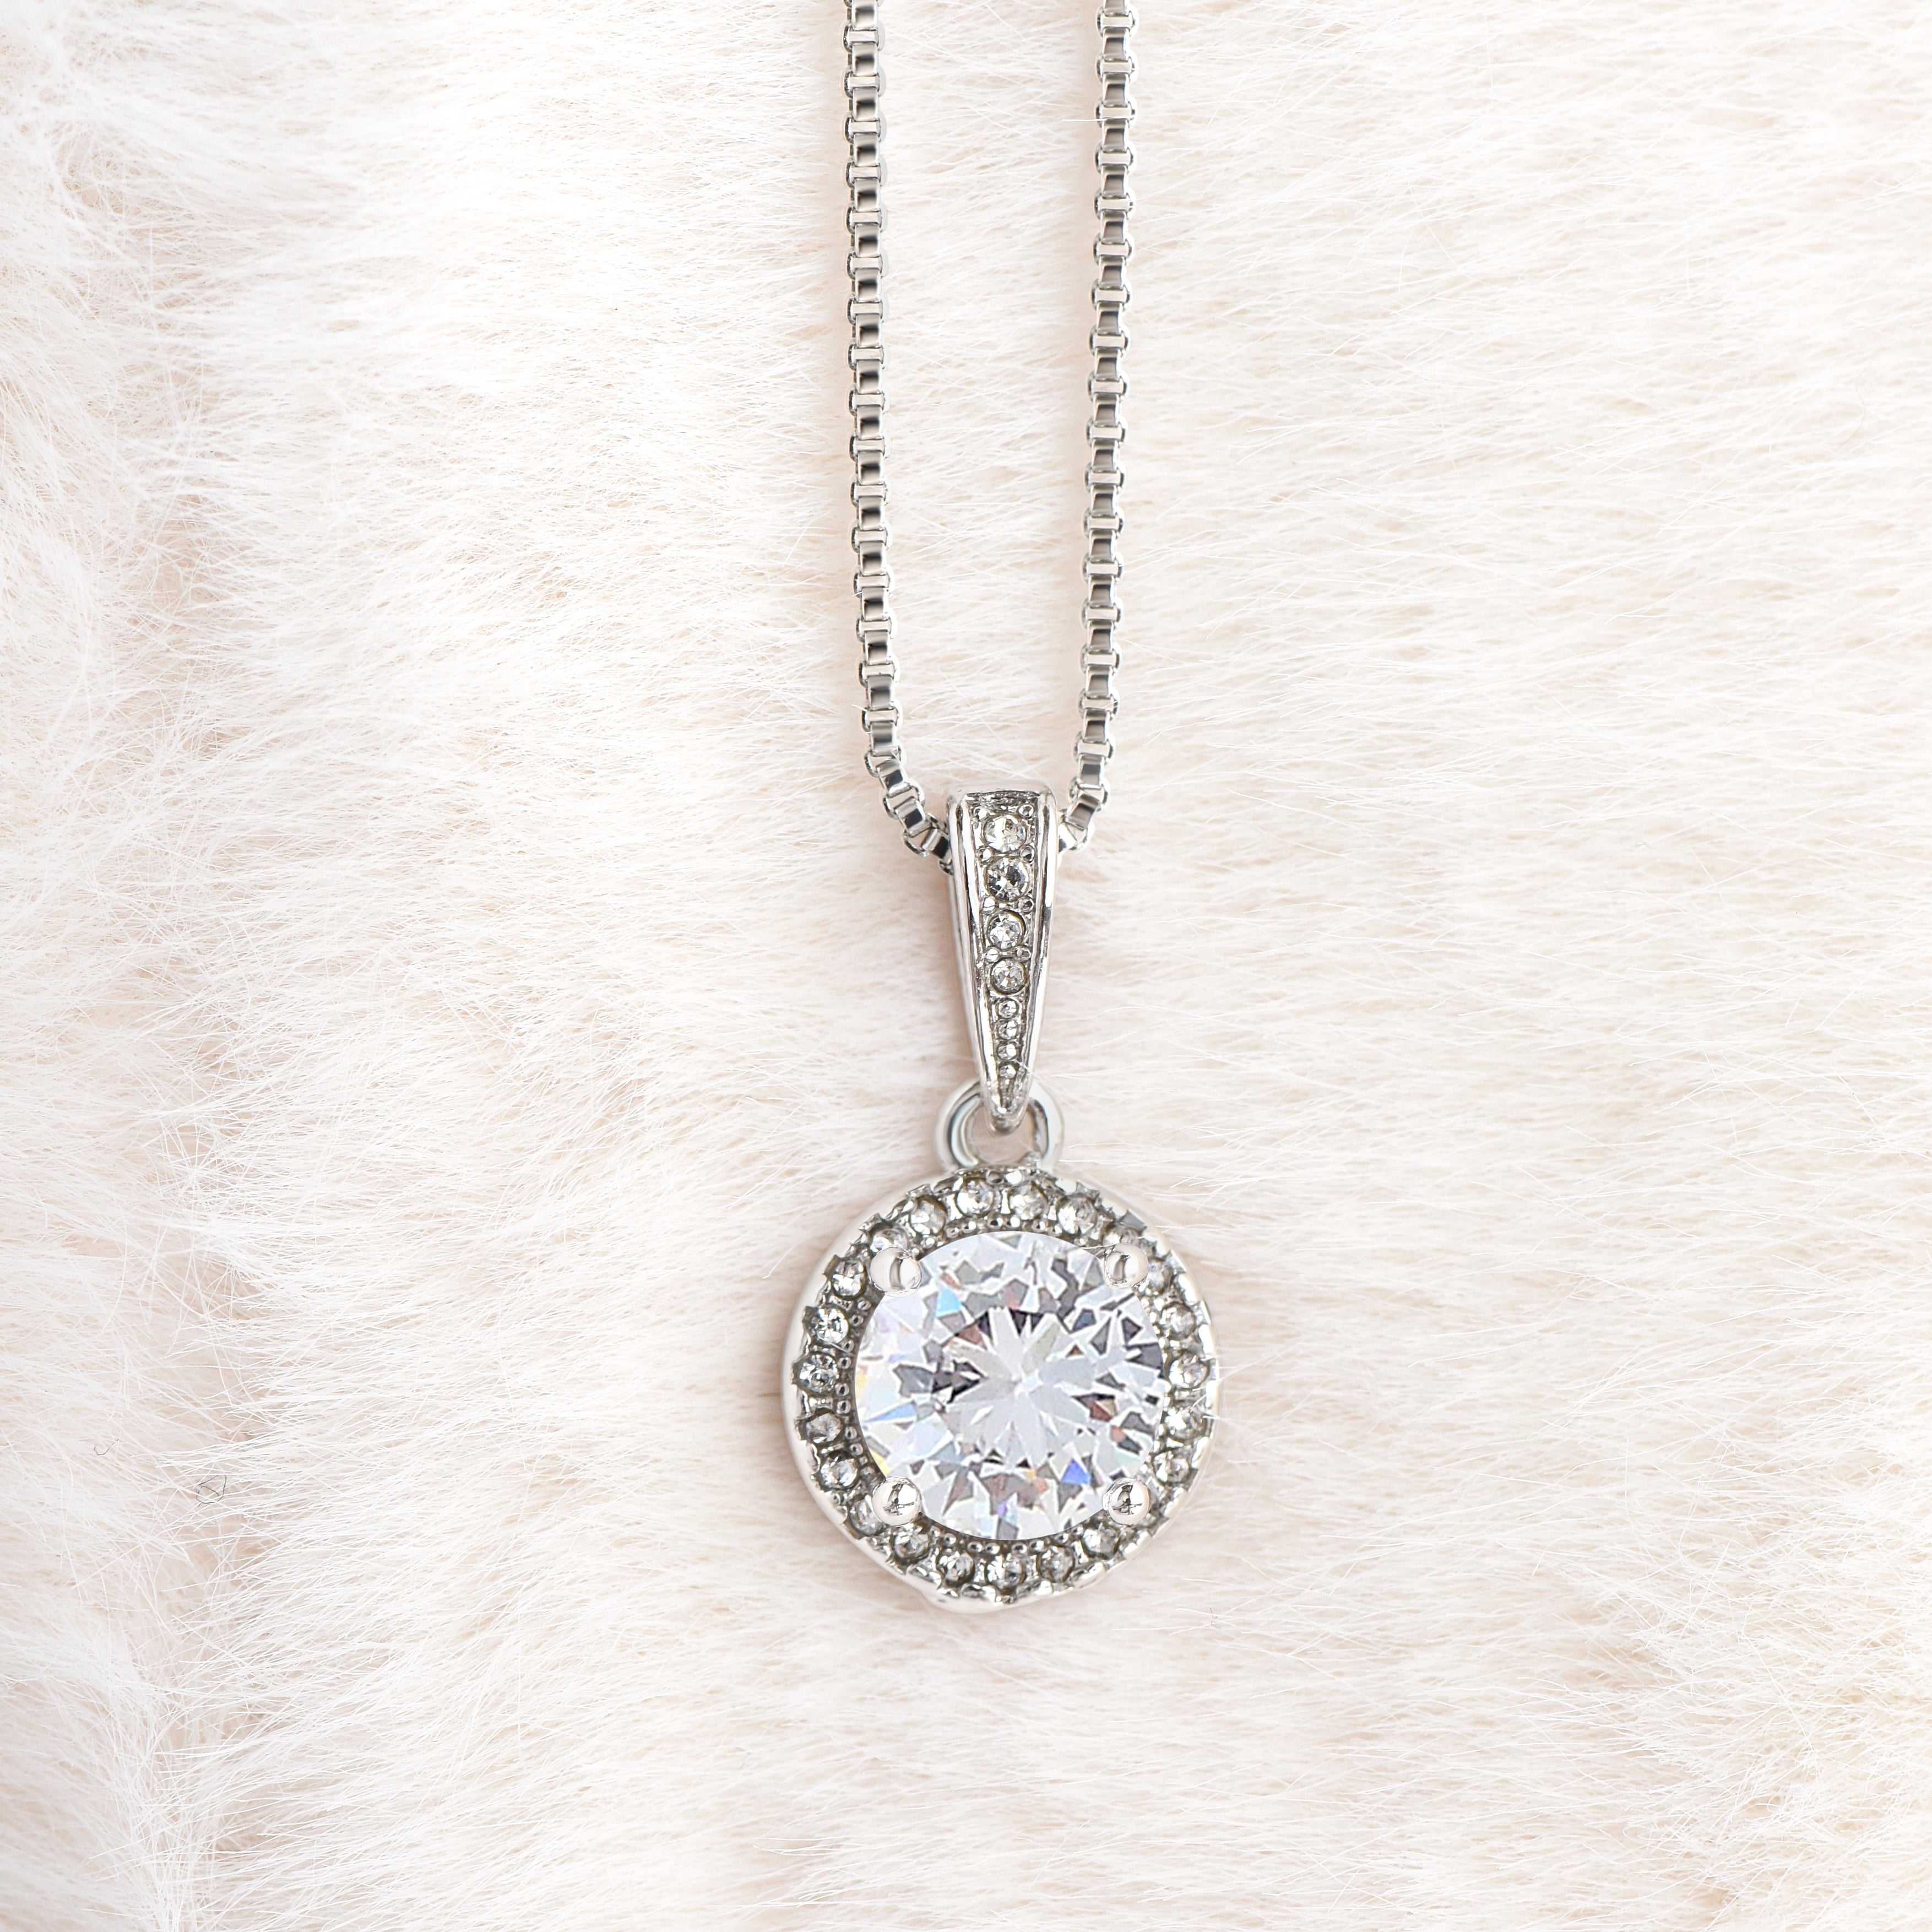 Personalized Daughter's Elegance Necklace with Cubic Zirconia